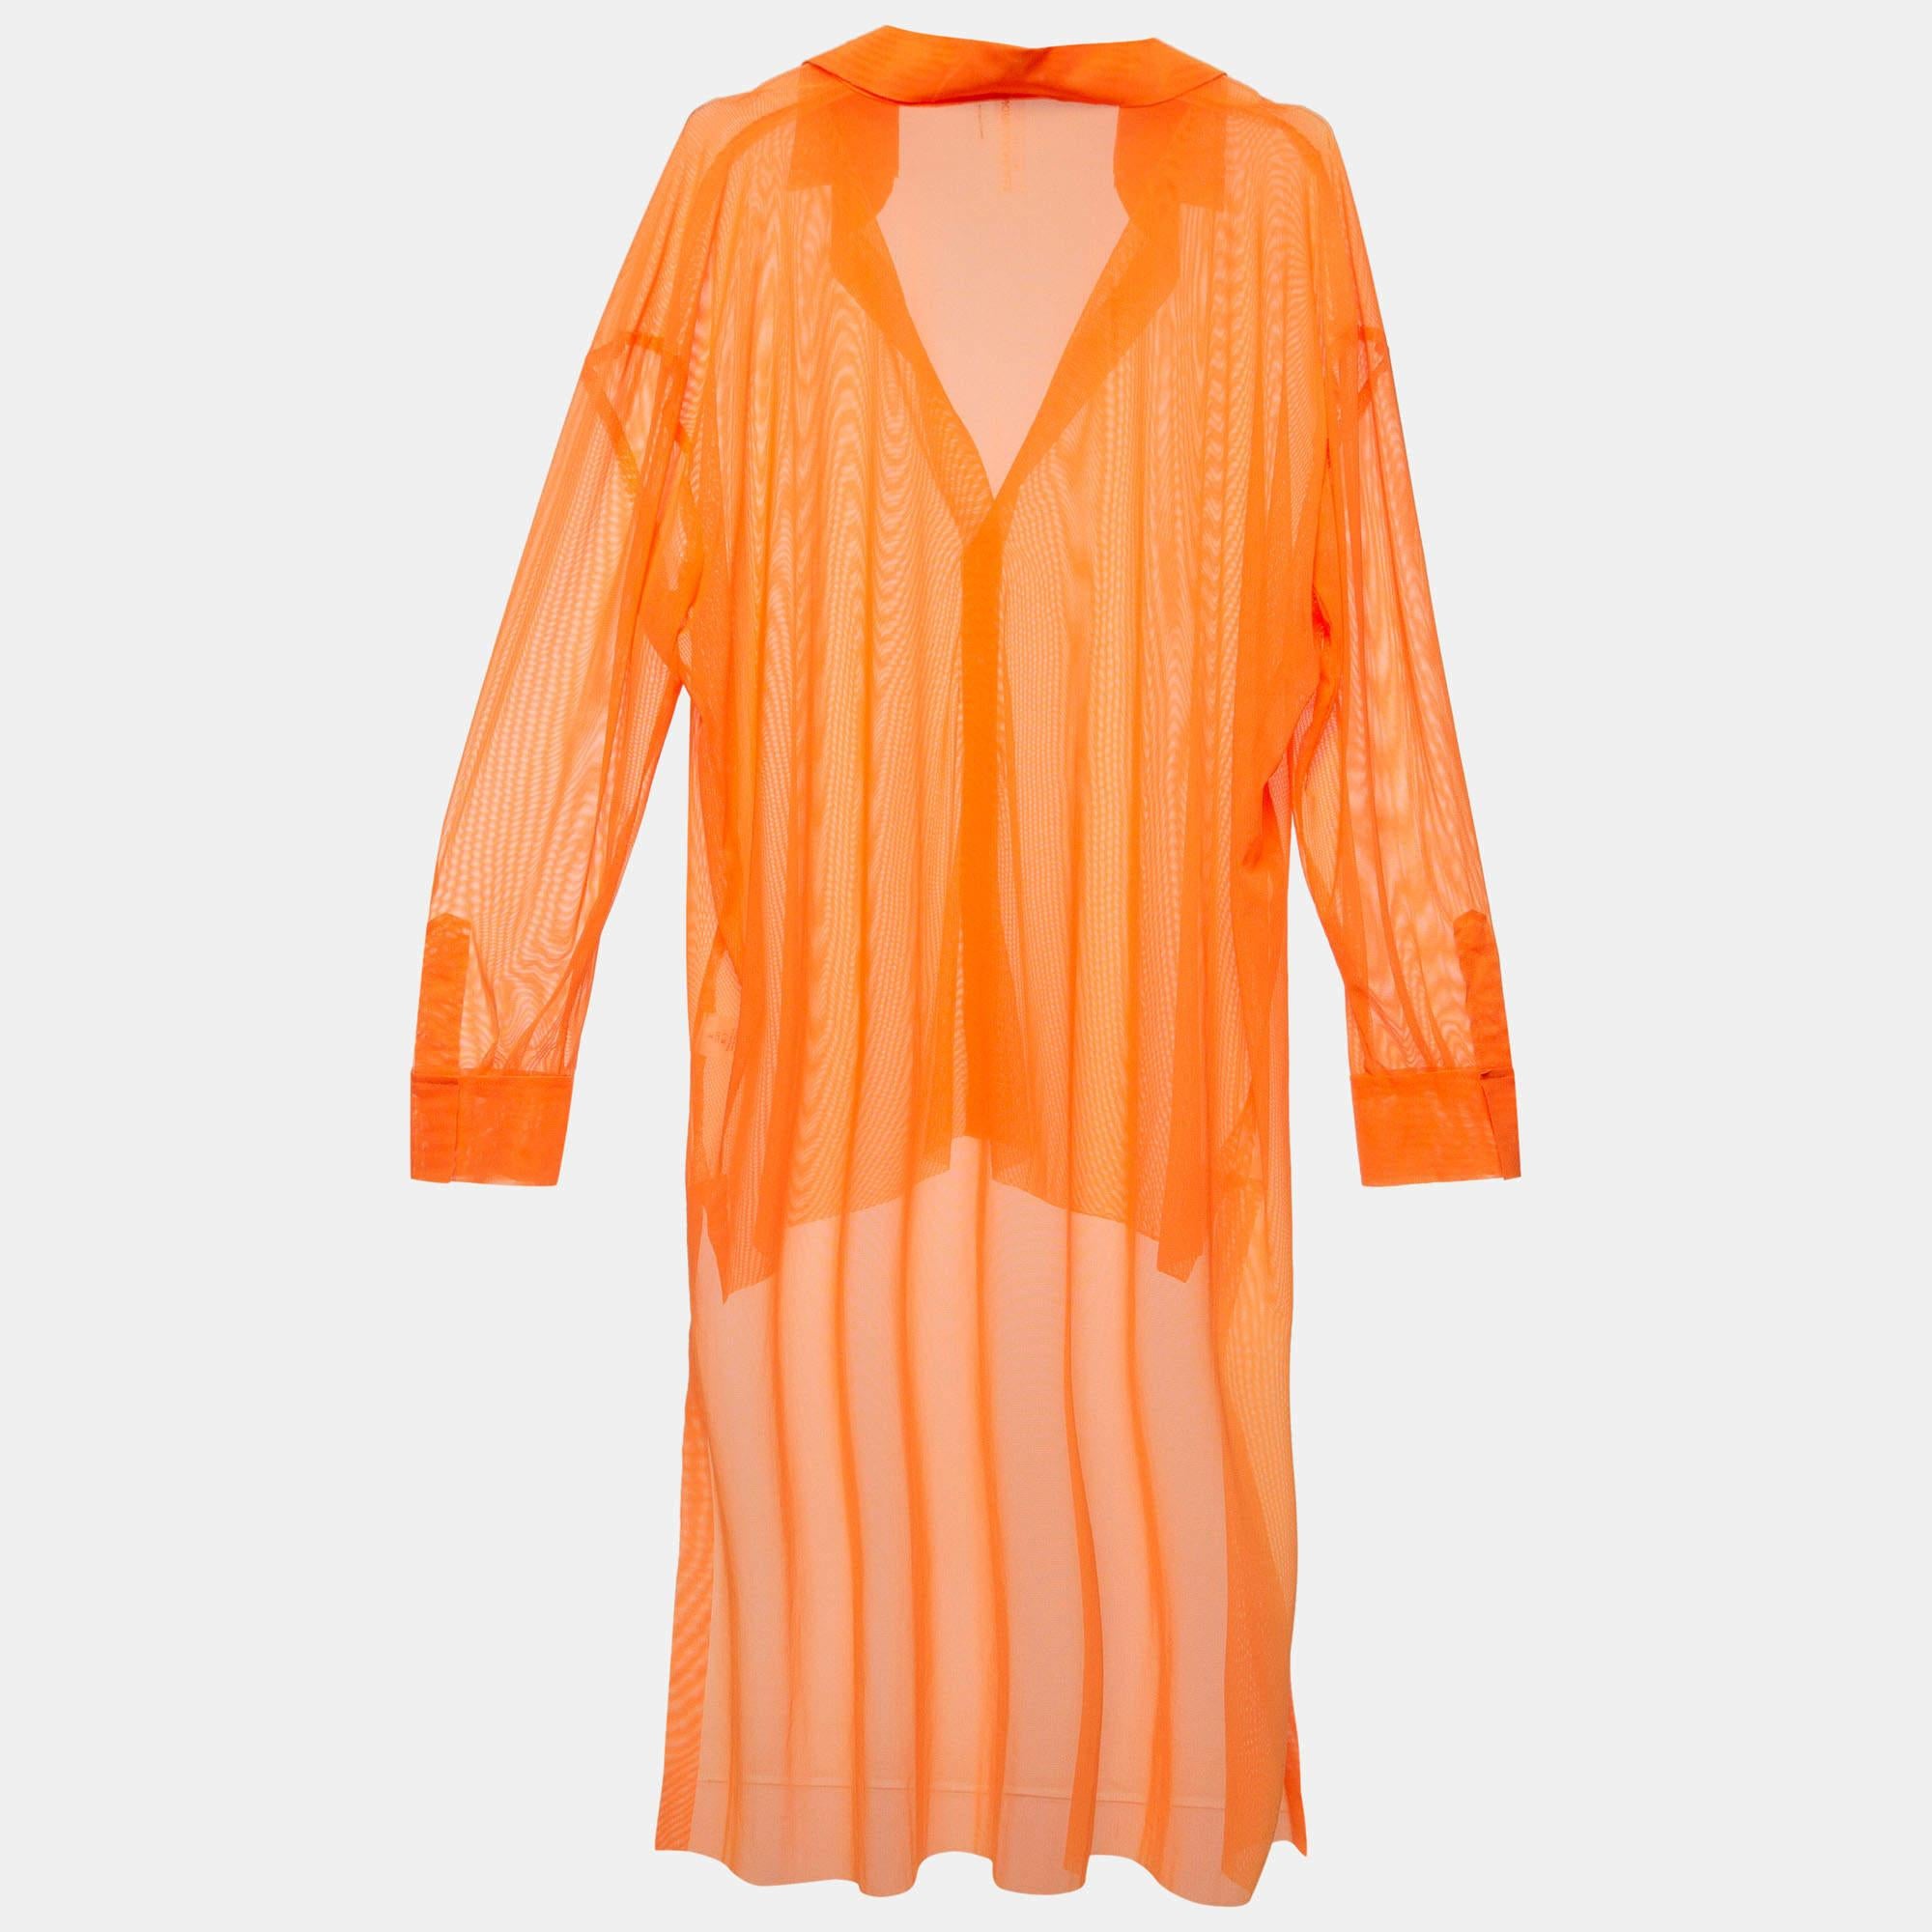 Norma Kamali's orange shirt has a sheer net design, long sleeves, and a high-low hemline. Pair it with a dress underneath or a top and jeans.

